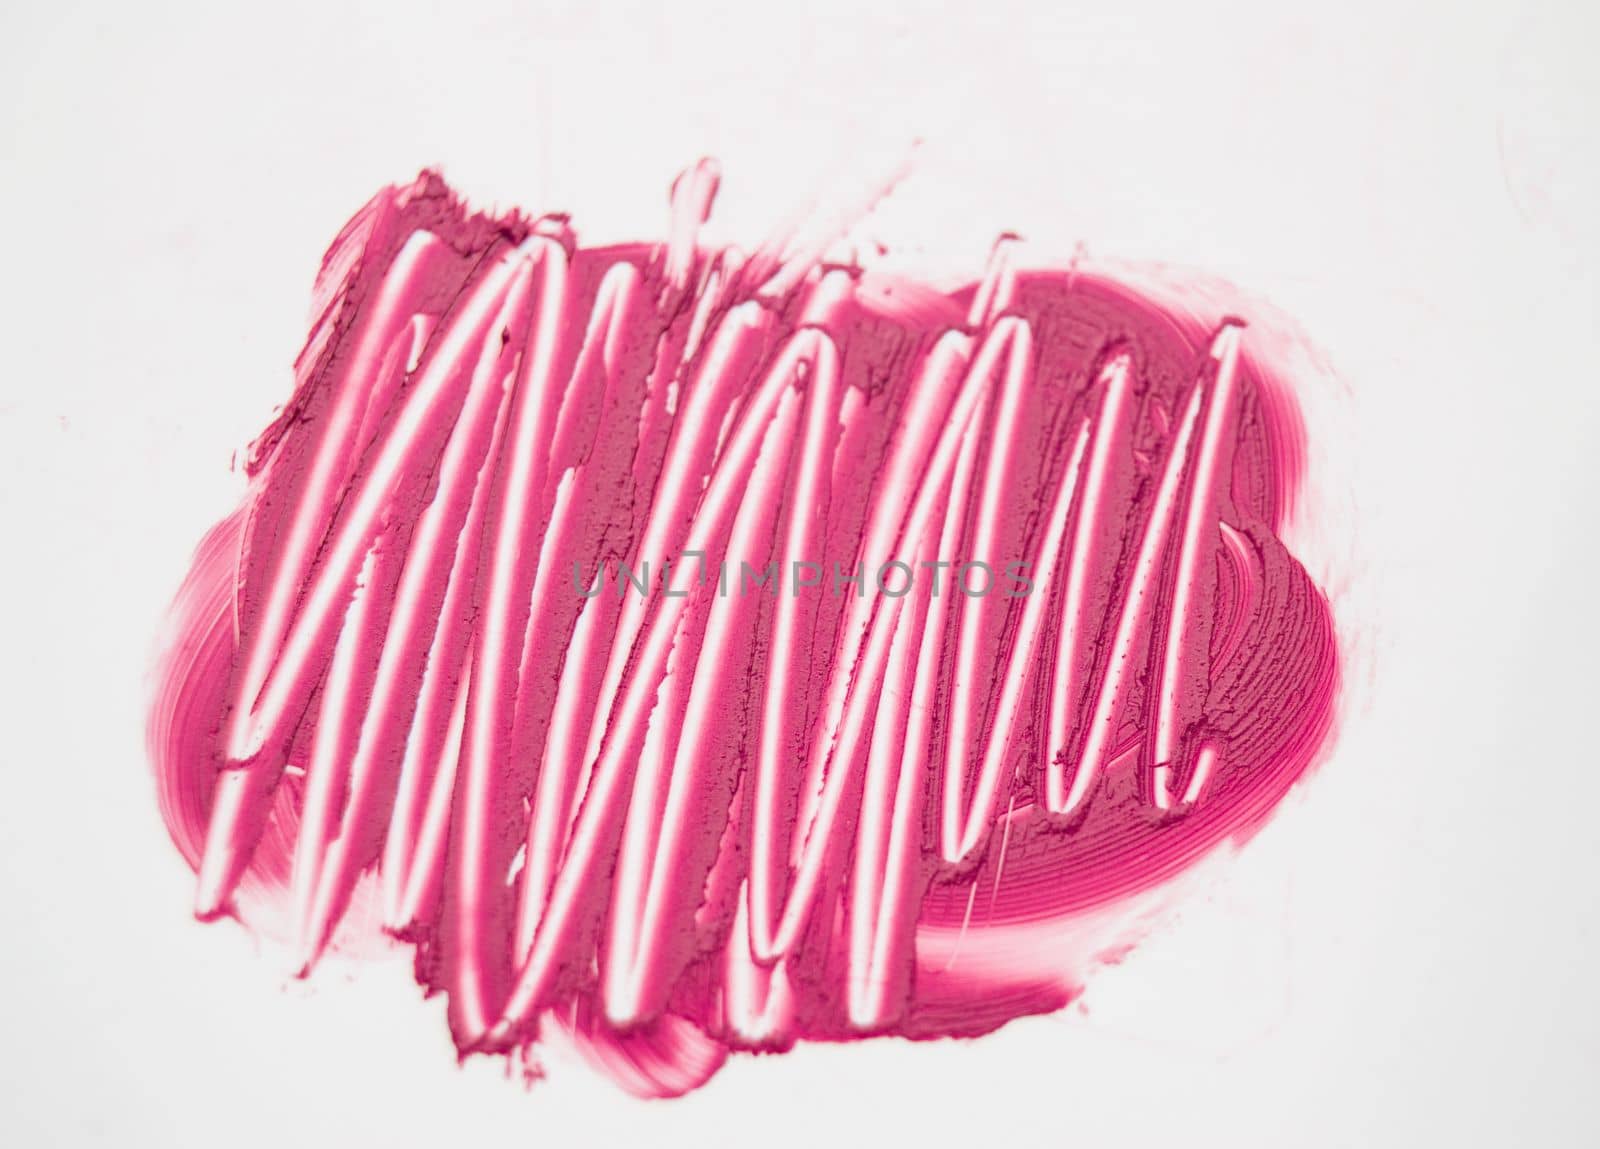 line of red lipstick smeared on white background